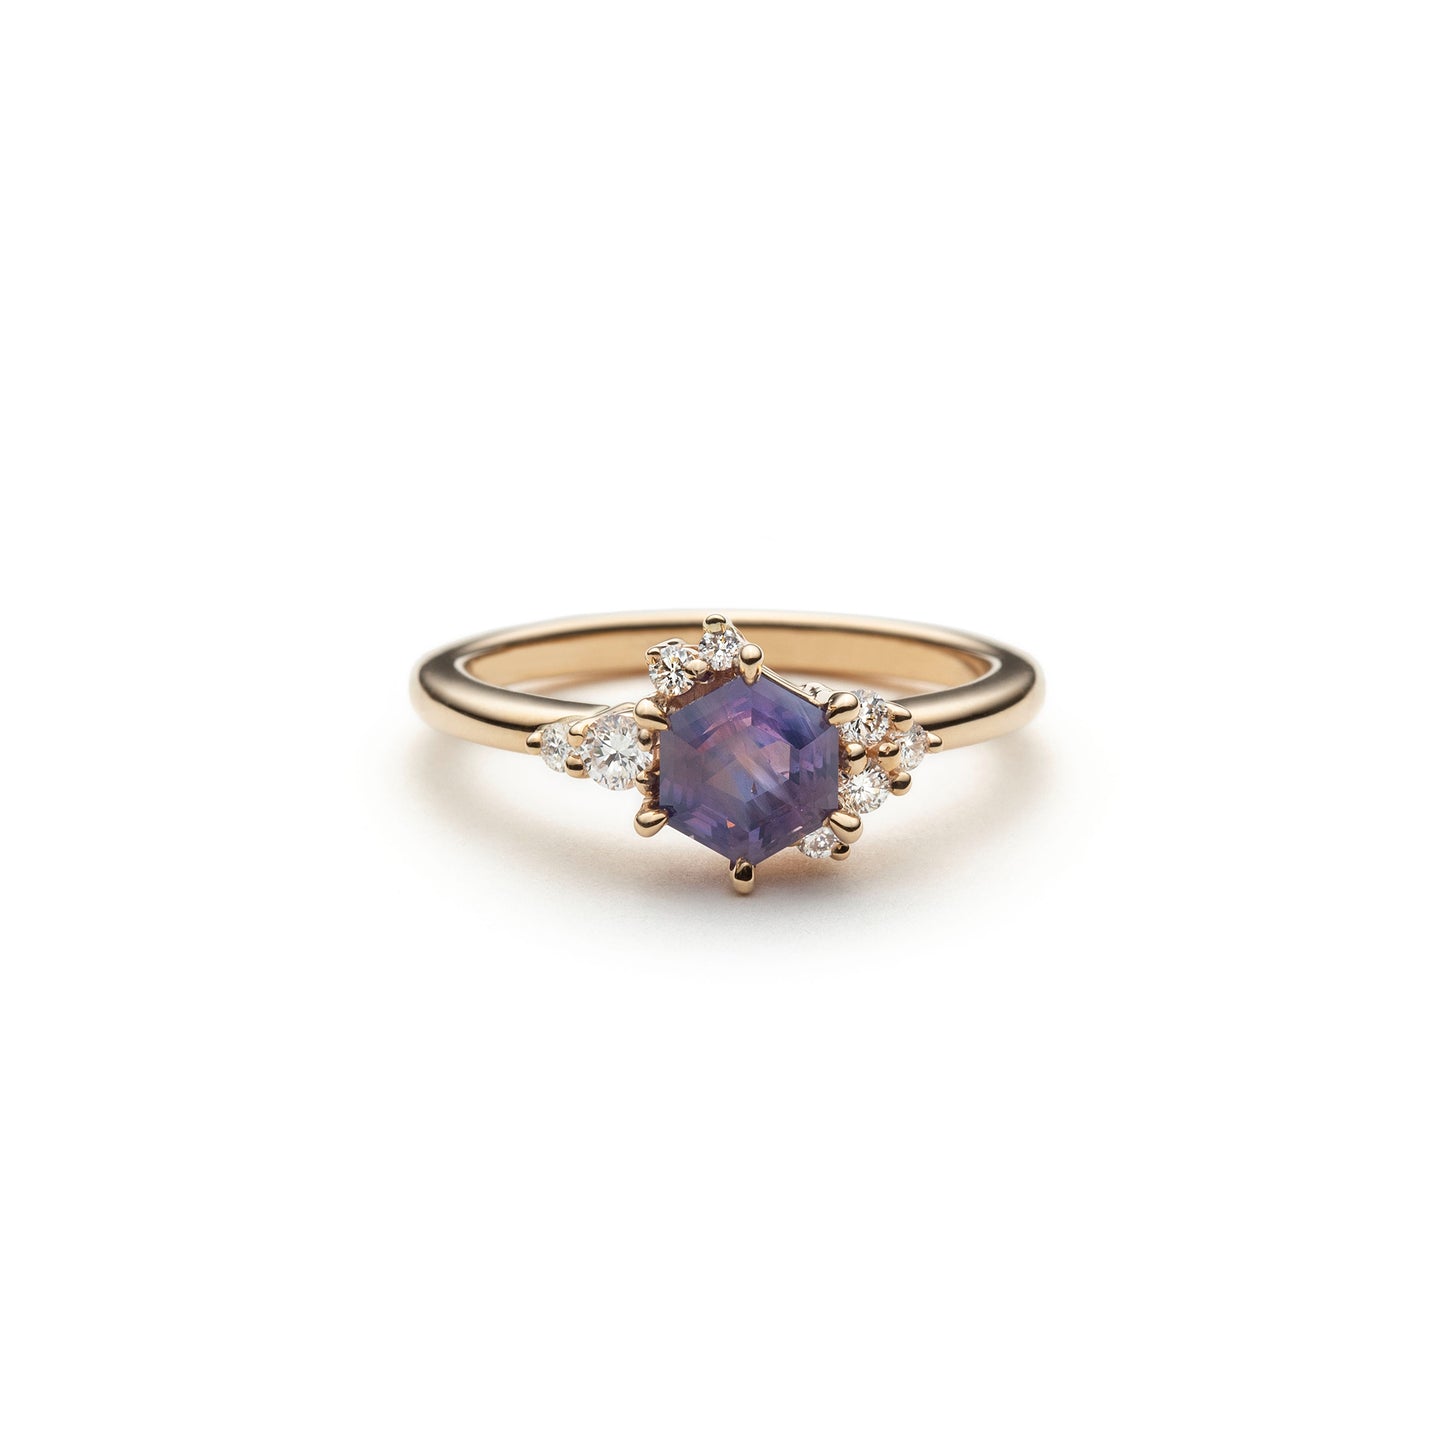 One of a kind Hexagon Opalescent Purple Sapphire and Diamond Asymmetric Ring